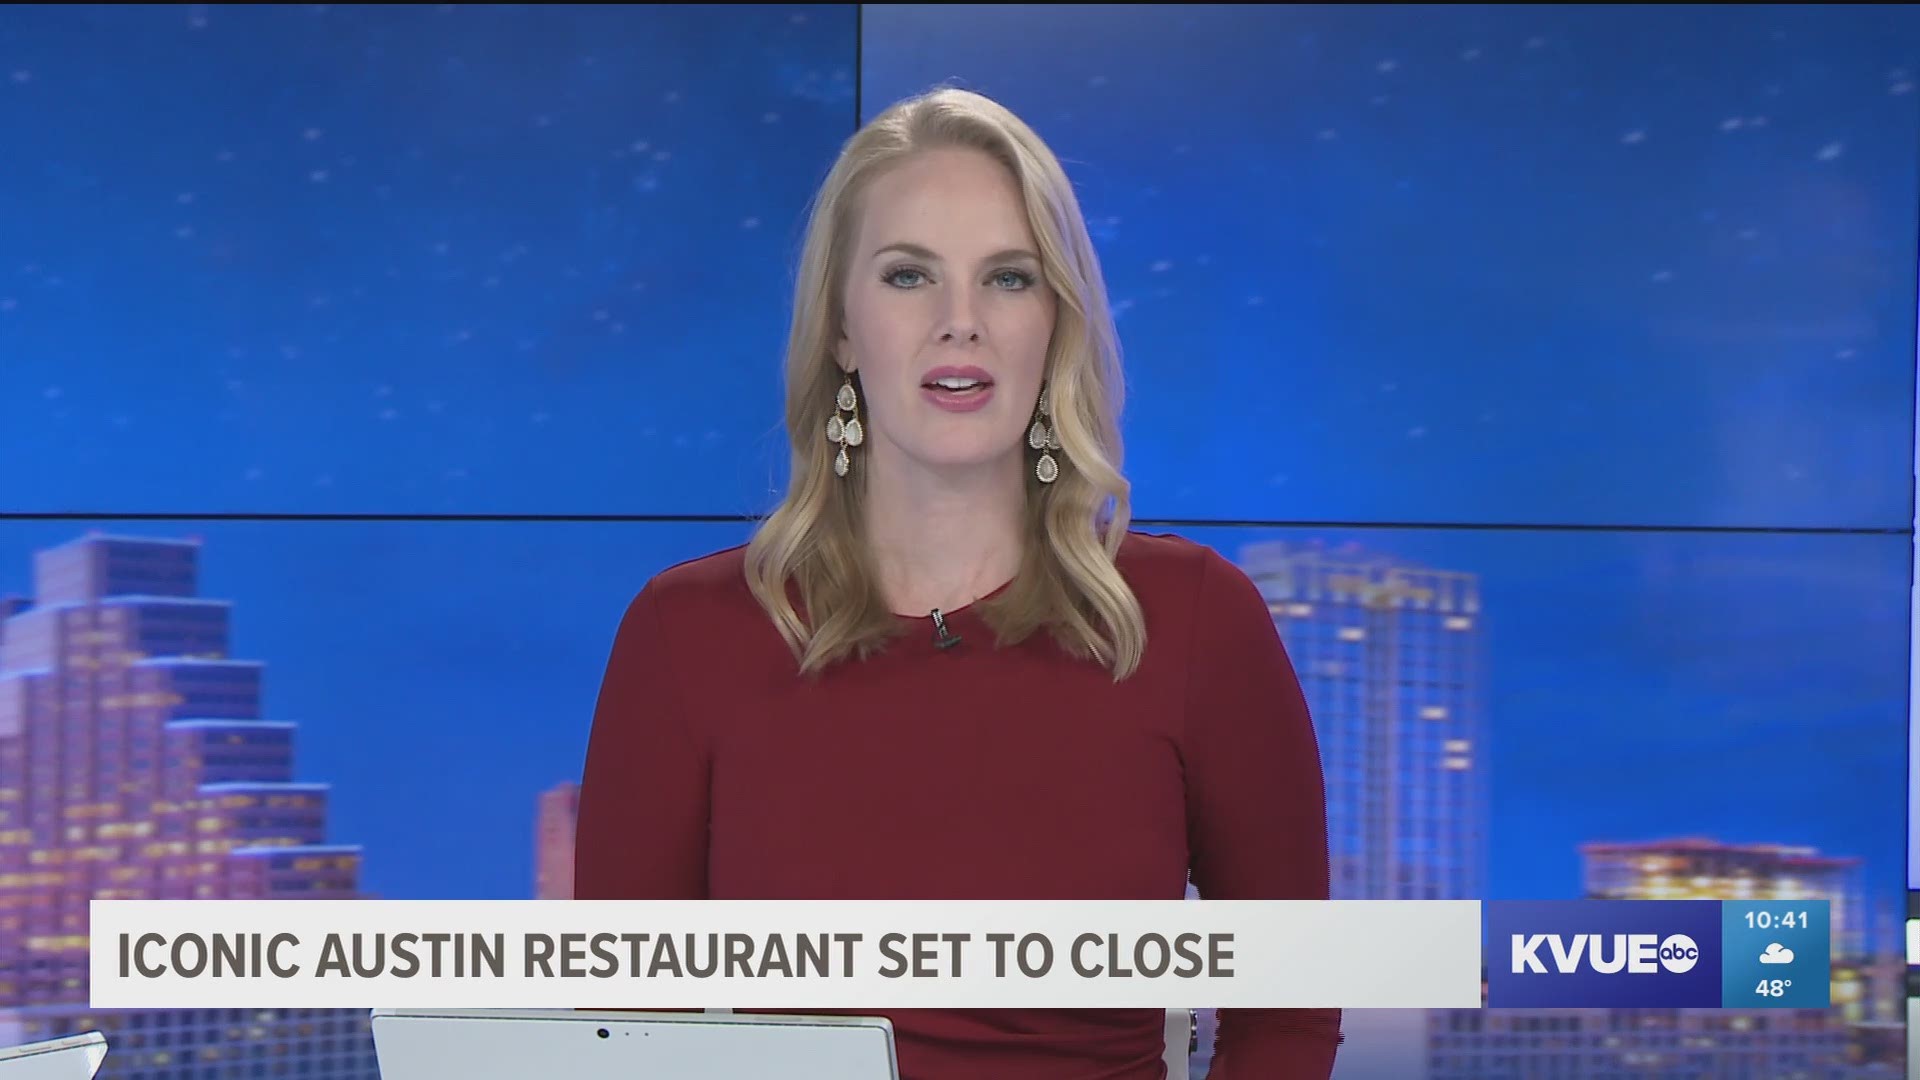 Another iconic Austin restaurant is set to close its doors.